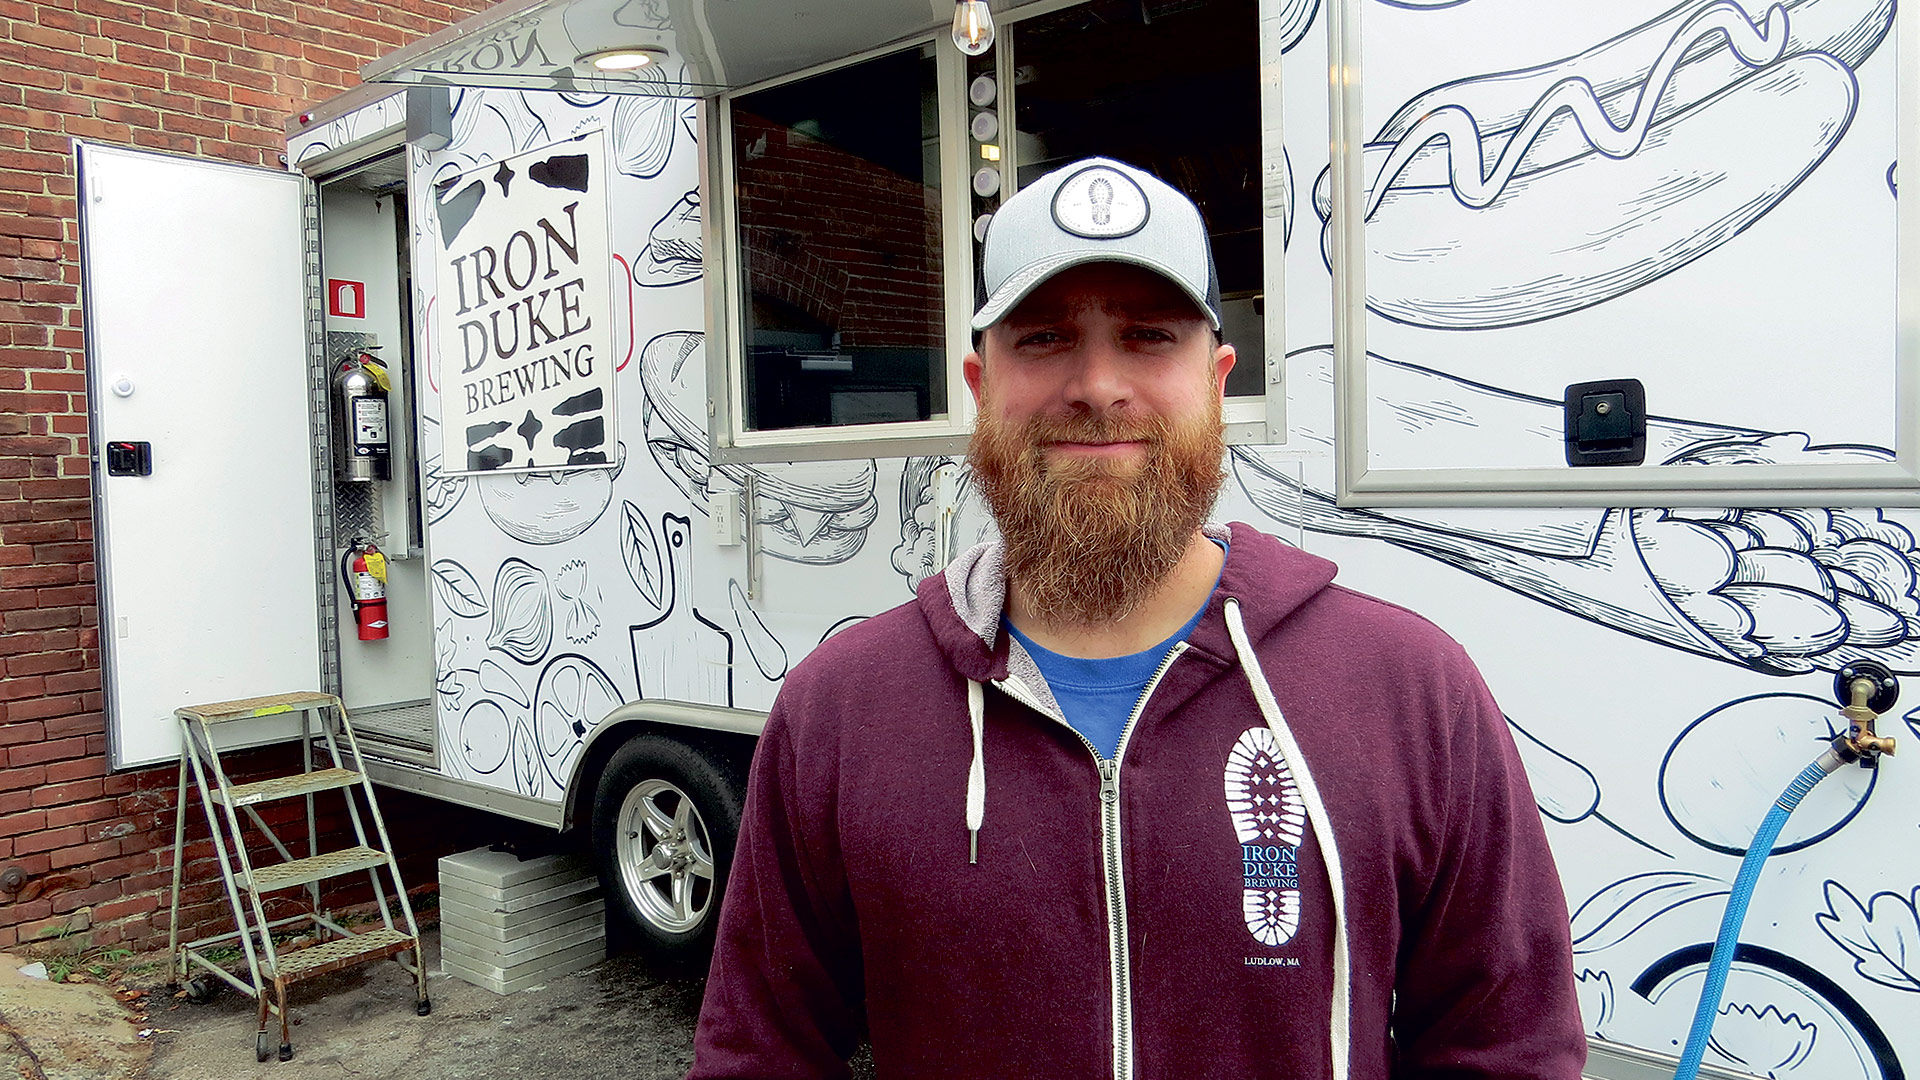 Iron Duke Brewing has added a food truck